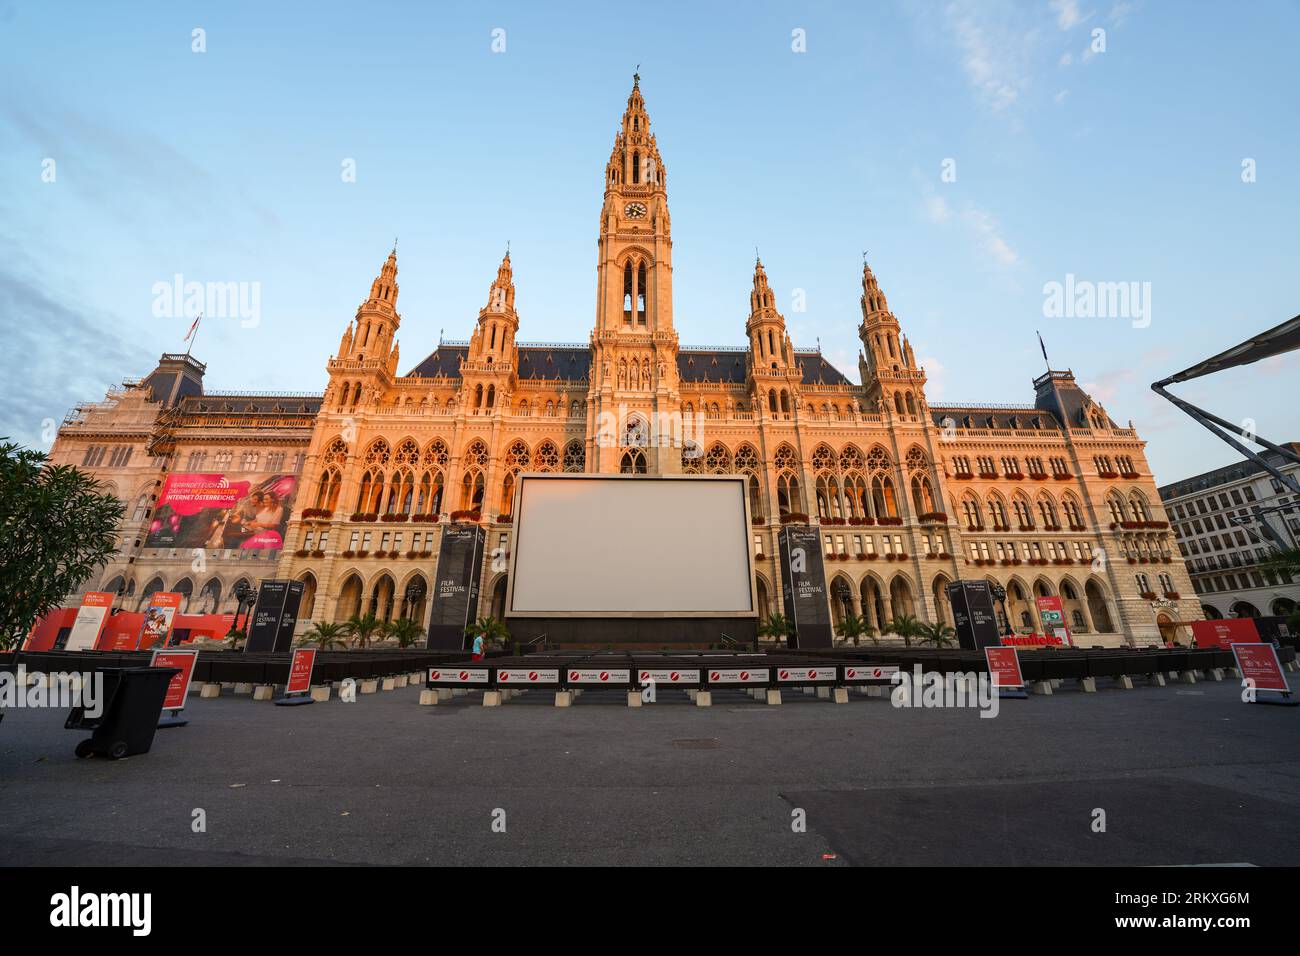 Vienna, Austria, Europe - May 26, 2023. Vienna Film Festival at the Rathaus, the City Hall in Rauthausplatz Square with a large outdoor movie screen. Stock Photo